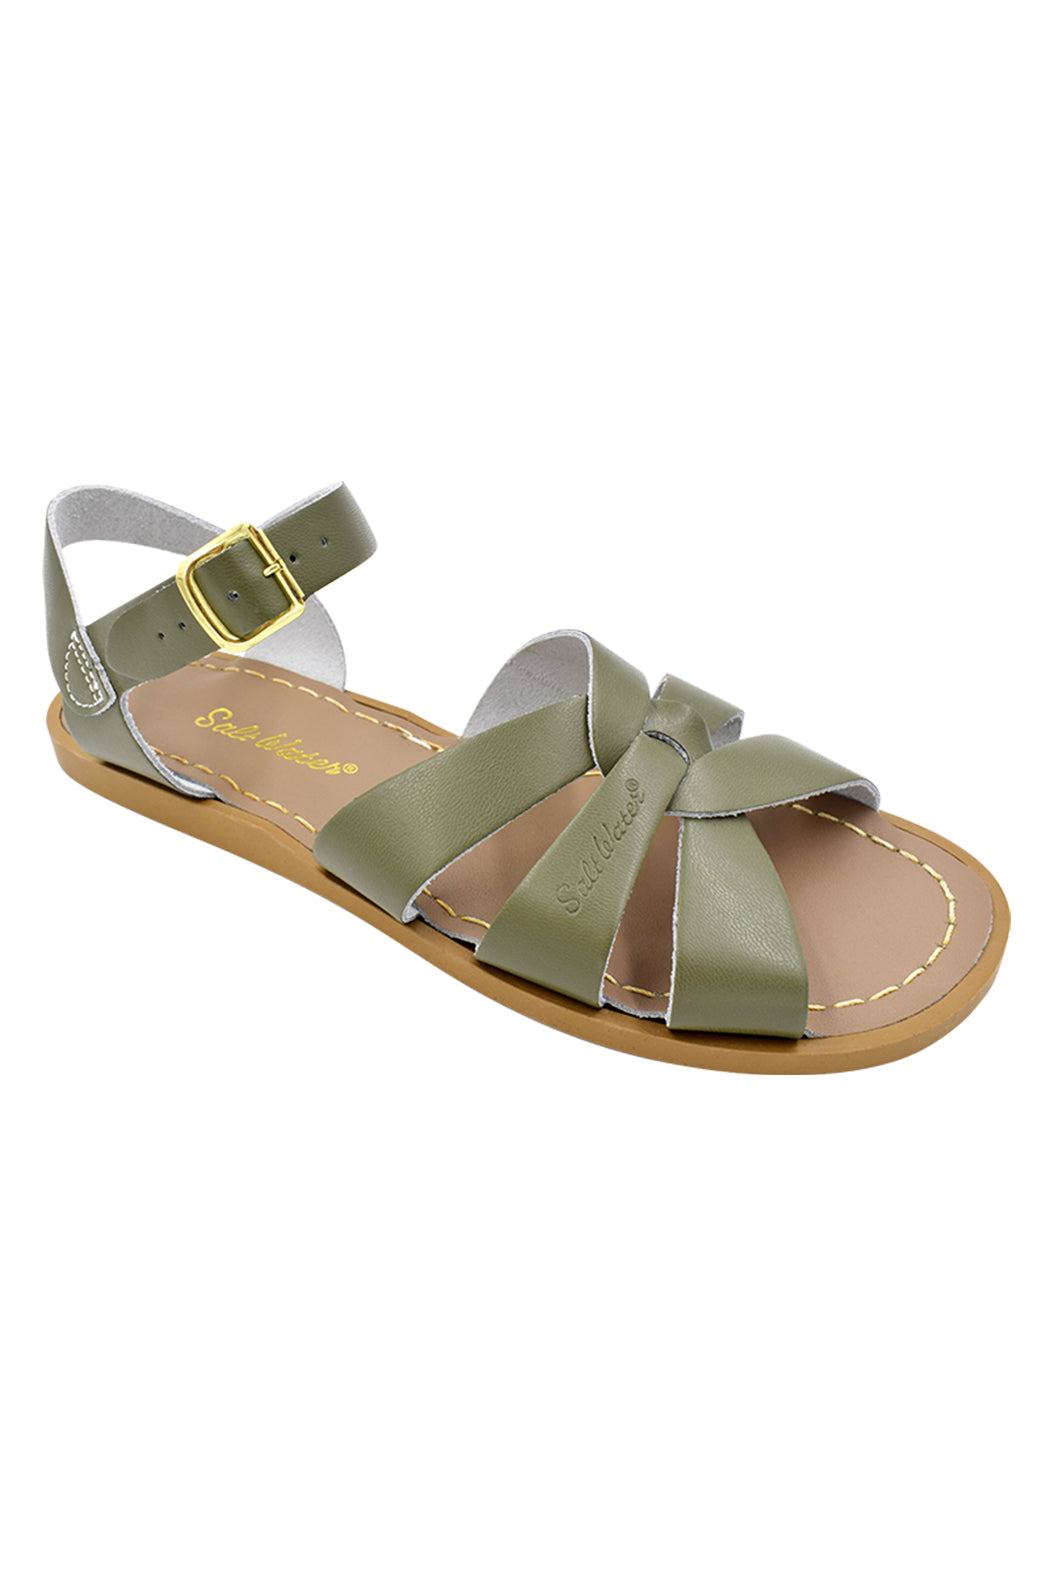 Hoy Shoes Salt Water Sandals Youth/Adult